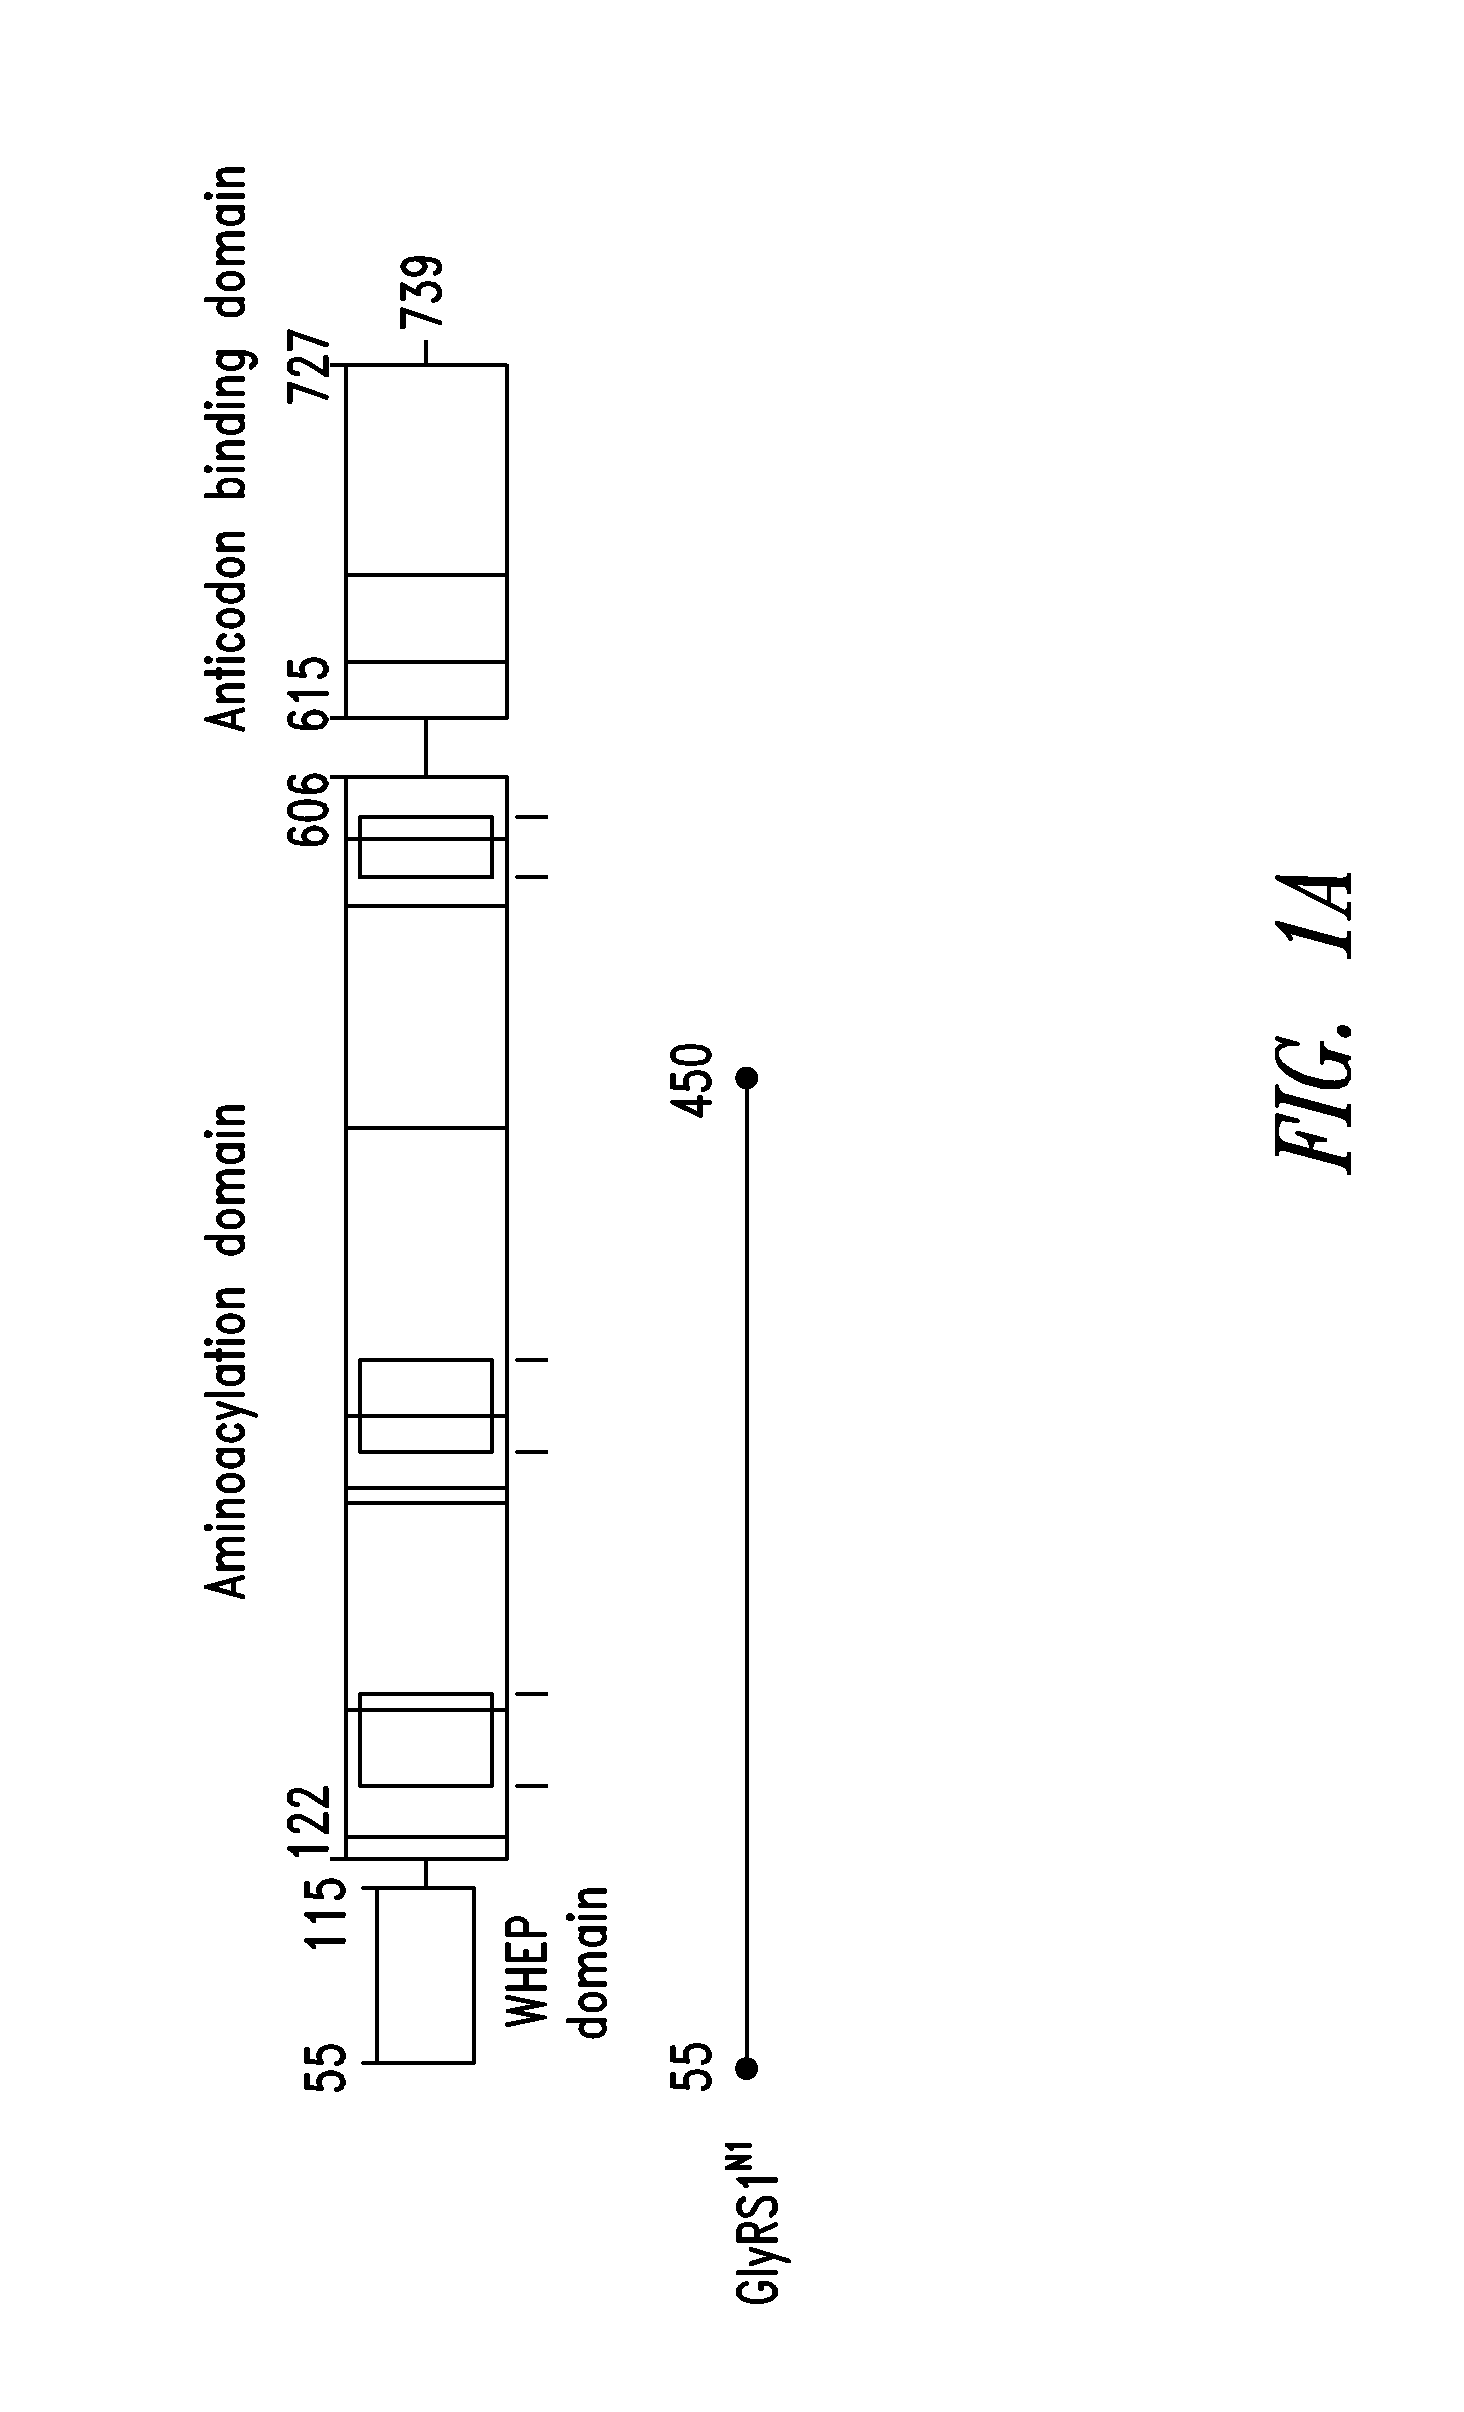 Innovative discovery of therapeutic, diagnostic, and antibody compositions related to protein fragments of glycyl-trna synthetases